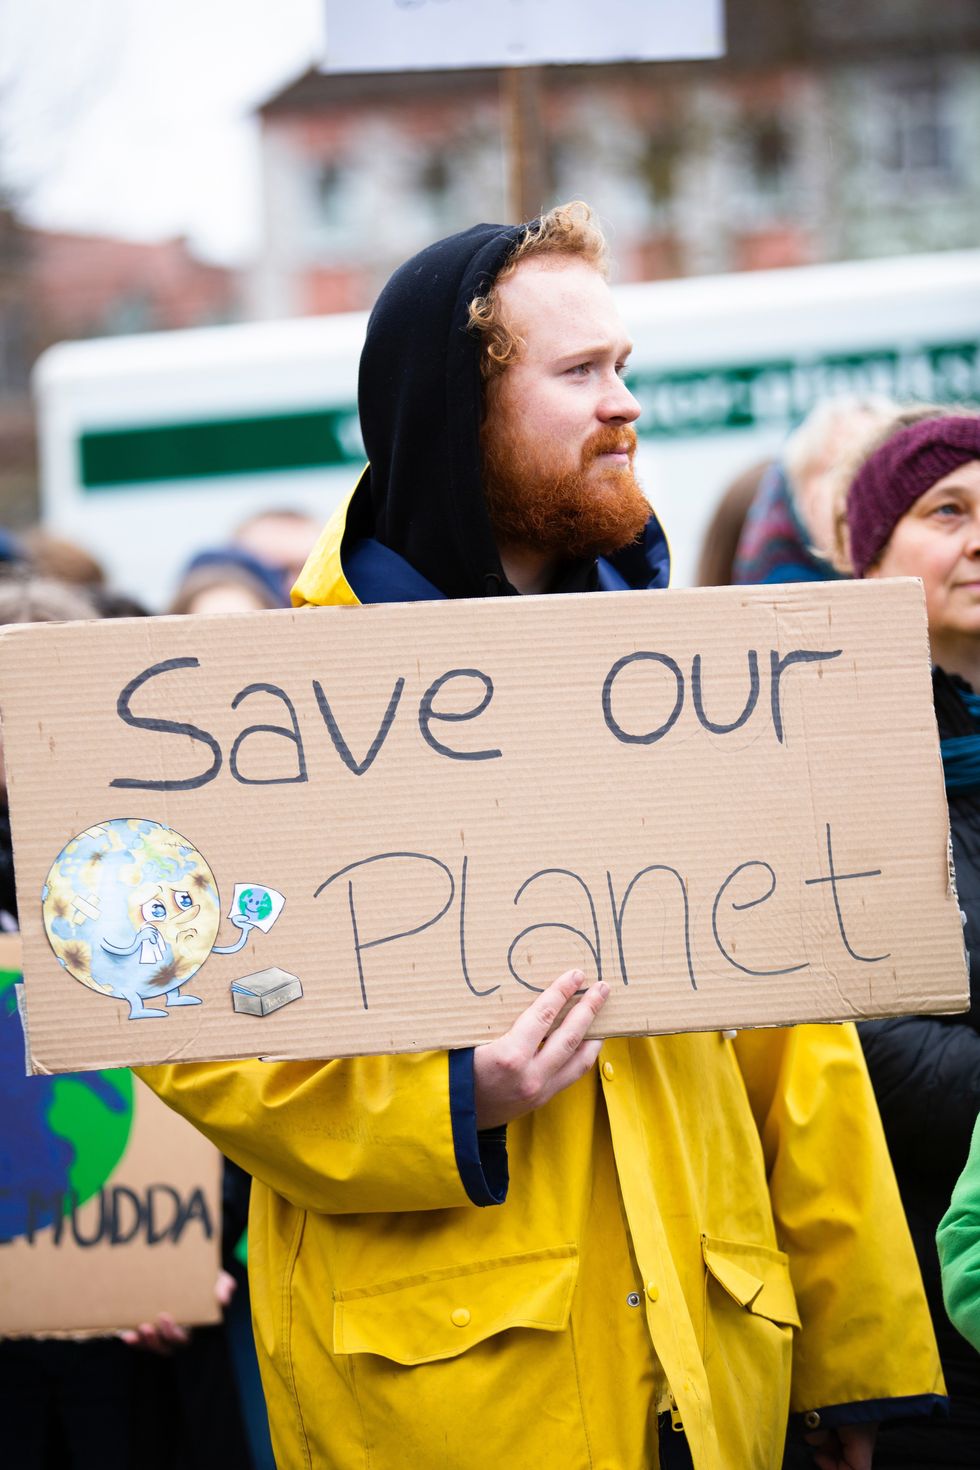 https://www.pexels.com/photo/person-holding-save-our-planet-sign-2027058/